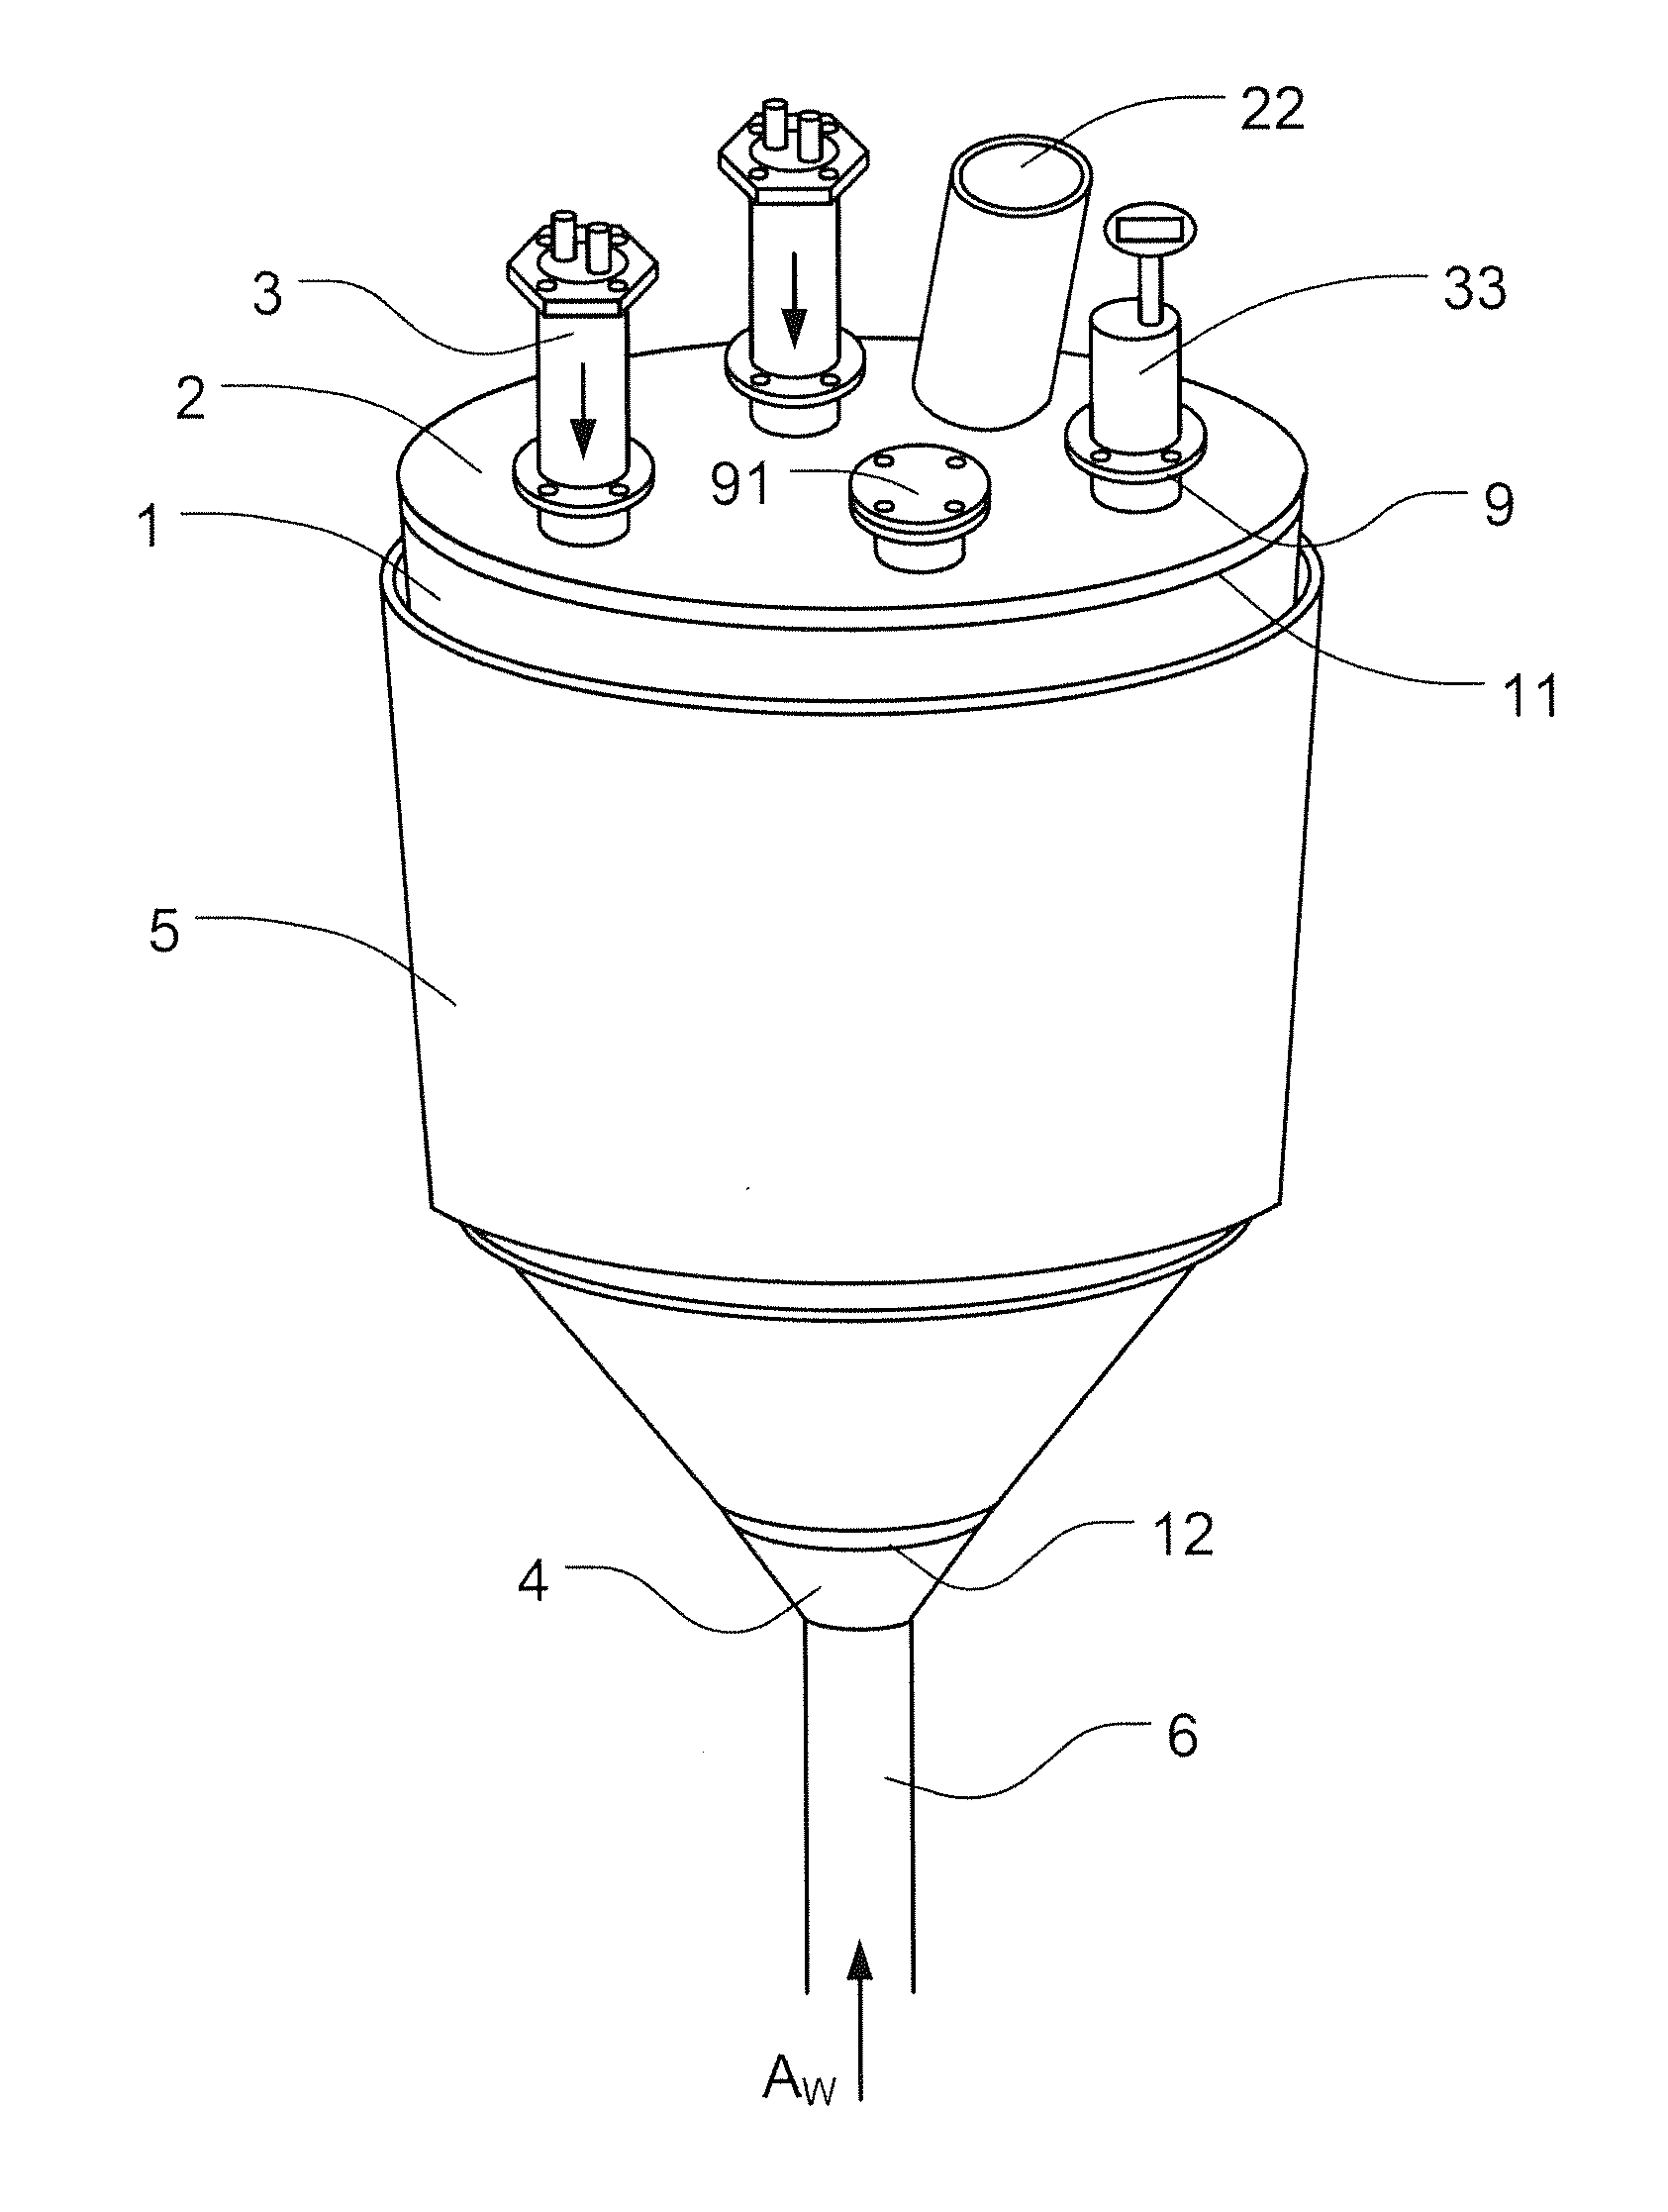 Hybrid heating apparatus applicable to the moving granular bed filter